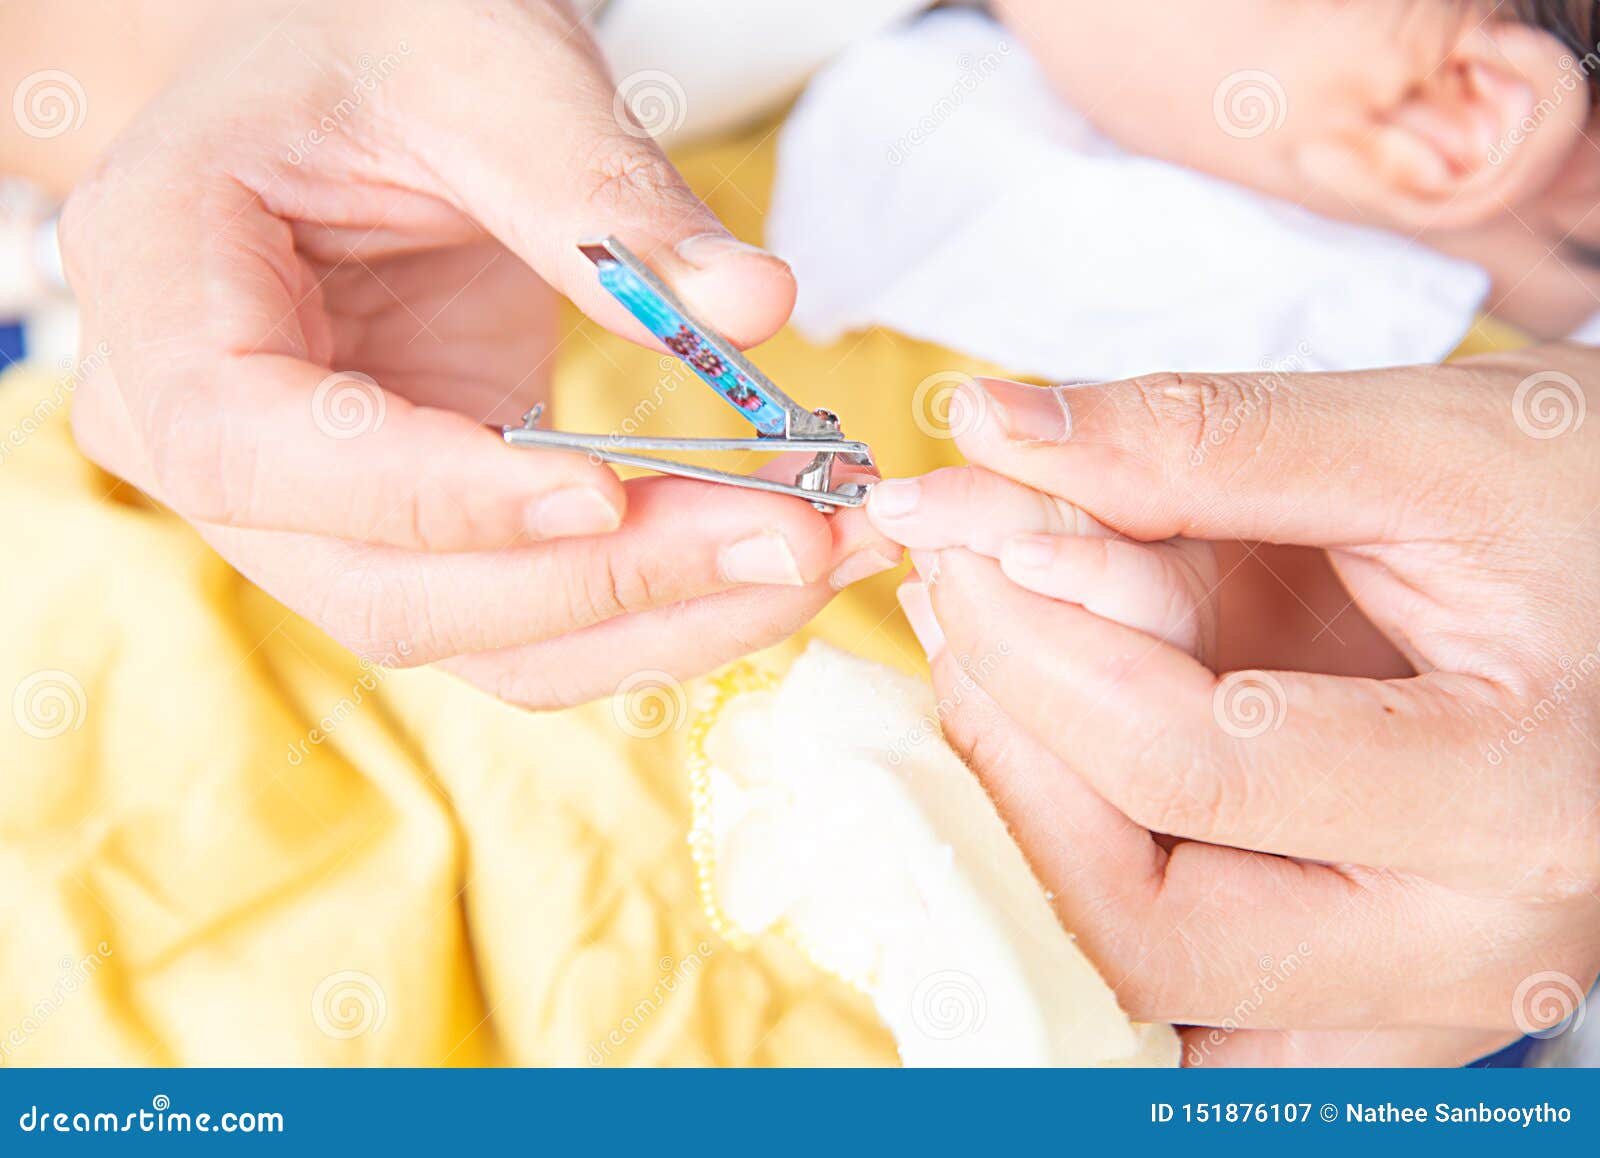 Mother Cutting Babies Nails Stock Image - Image of blue, finger: 151876107